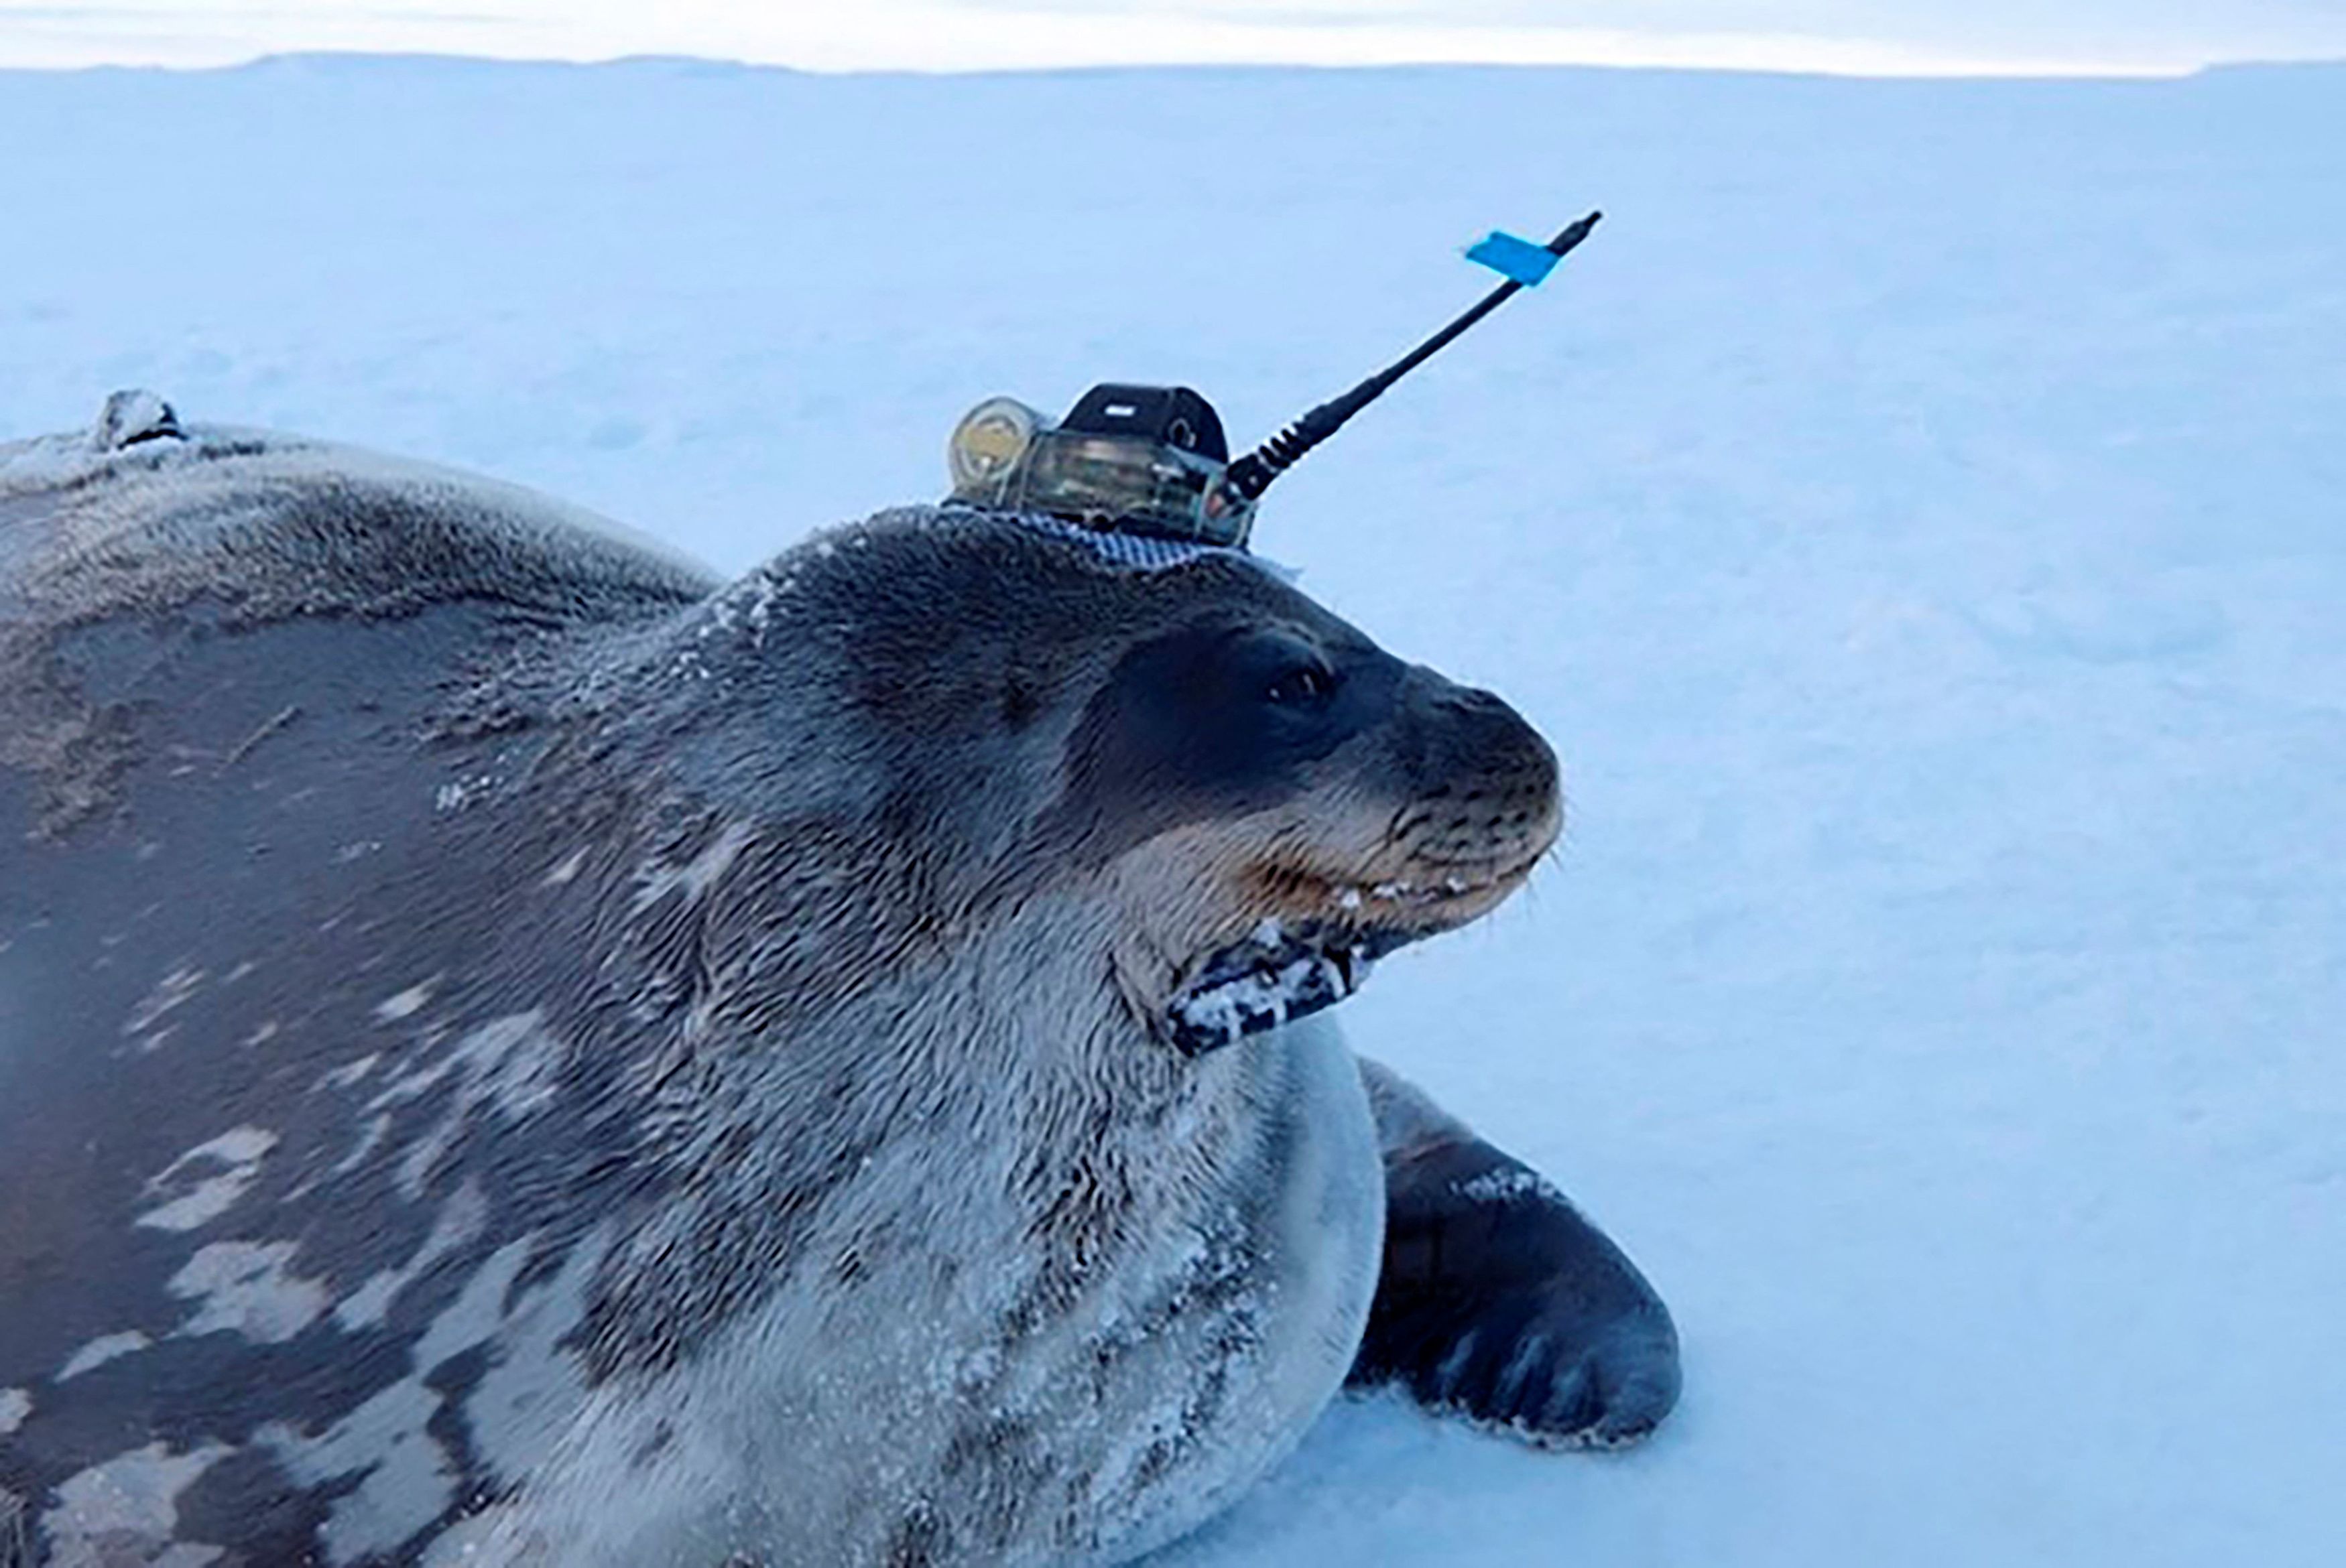 Weddell seal fitted with high-tech head-mounted measuring devices to survey waters under the thick ice sheet in Antarctica